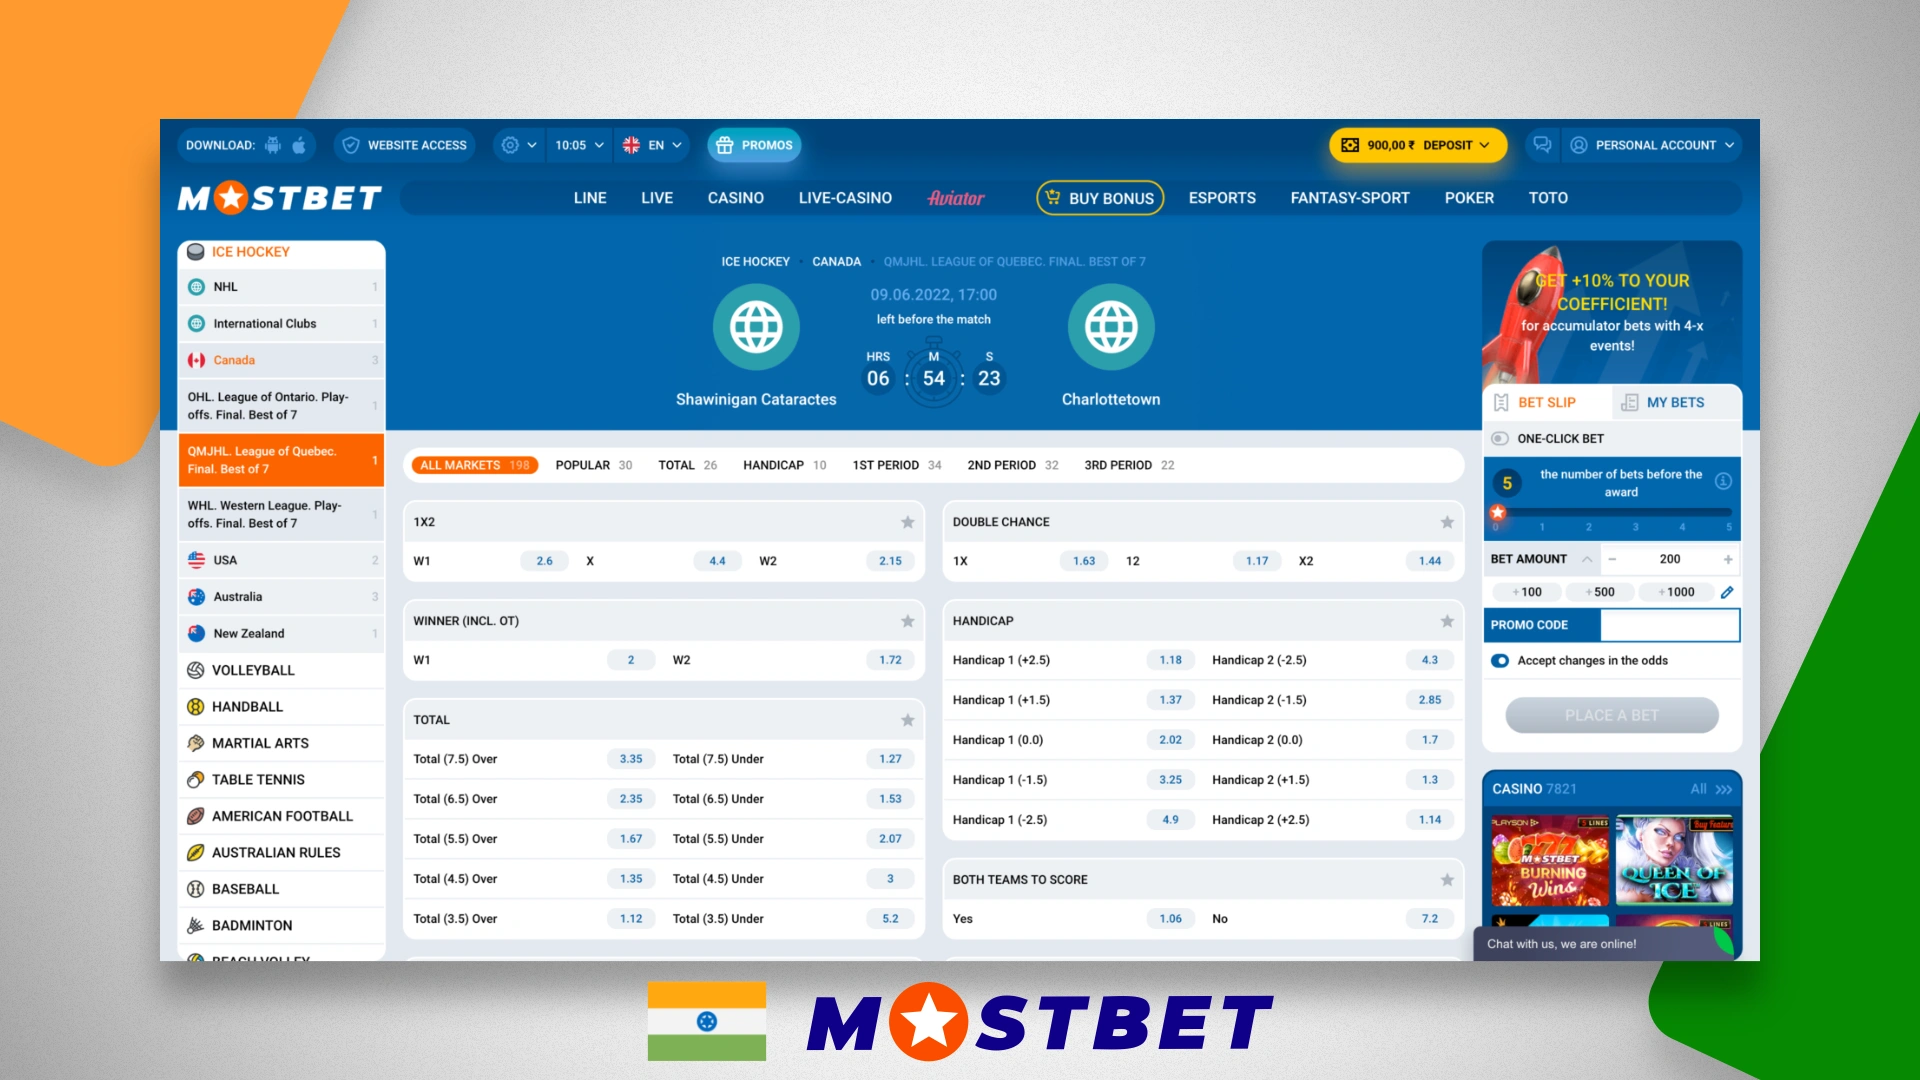 The page of the selected hockey match on the Mostbet India website